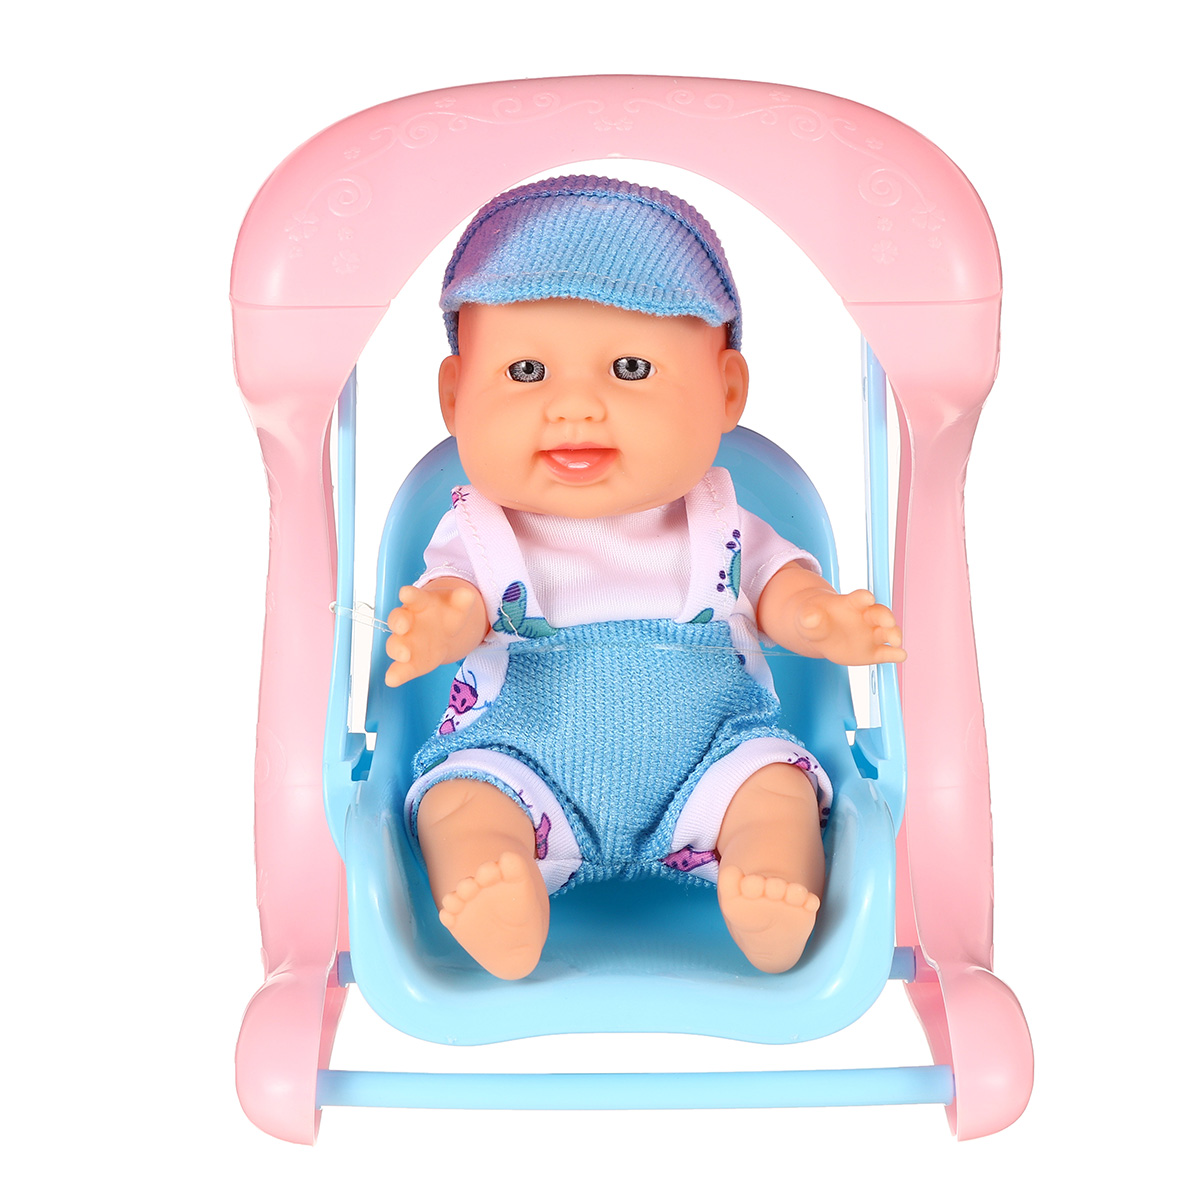 Simulation-Baby-3D-Creative-Cute-Doll-Play-House-Toy-Doll-Vinyl-Doll-Gift-1818655-10